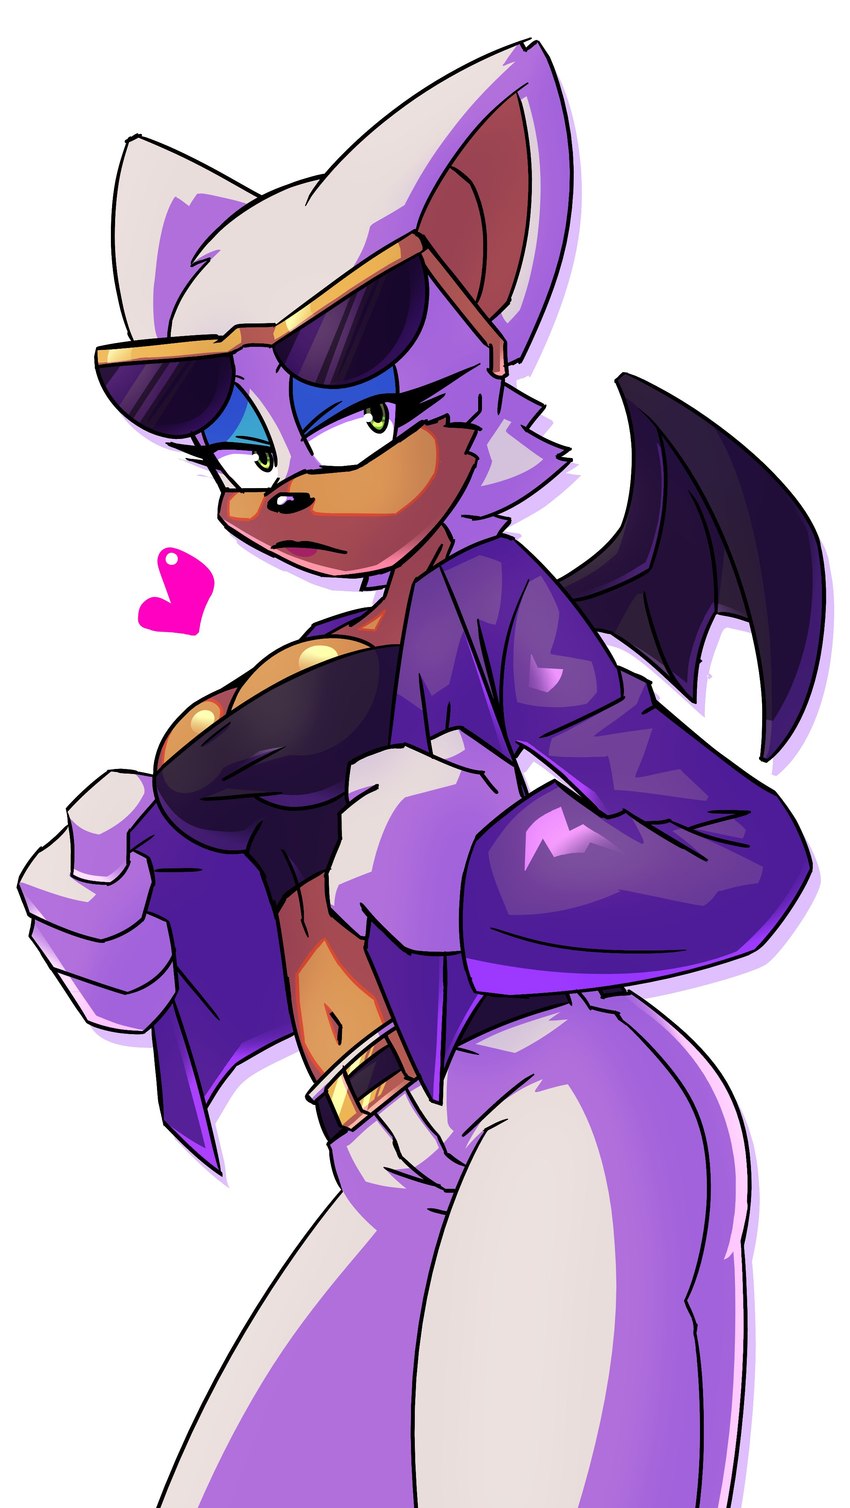 rouge the bat (the murder of sonic the hedgehog and etc) created by bonk150